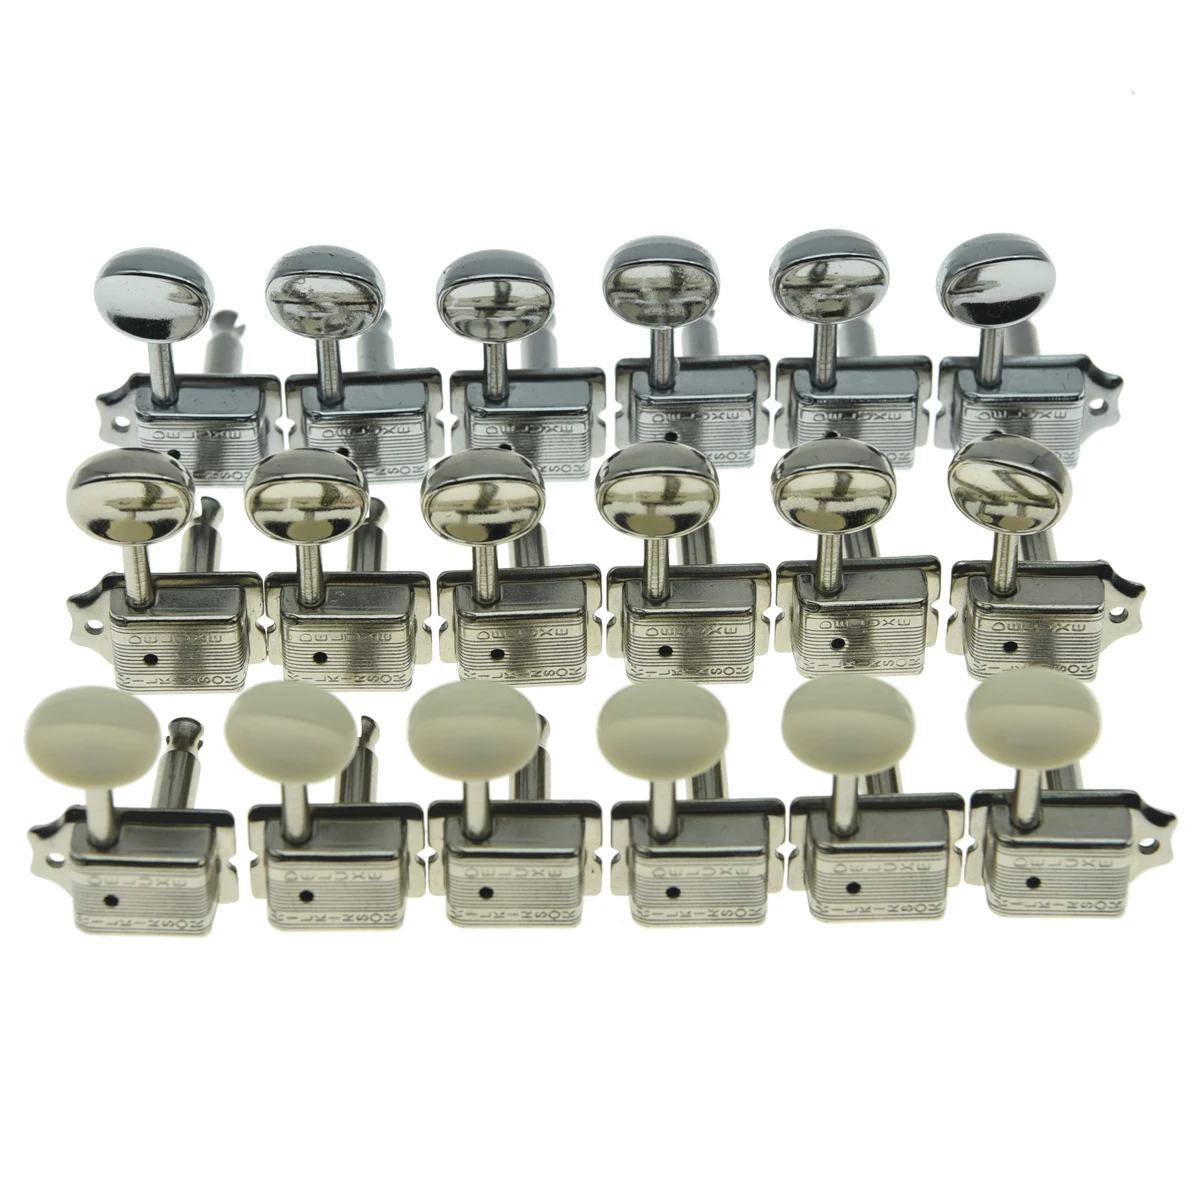 KAISH 6 Inline Guitar Vintage Style Locking Tuners Guitar Tuning Keys Guitar Lock Machine Heads for Strat Tele Nickel with Ivory Button 